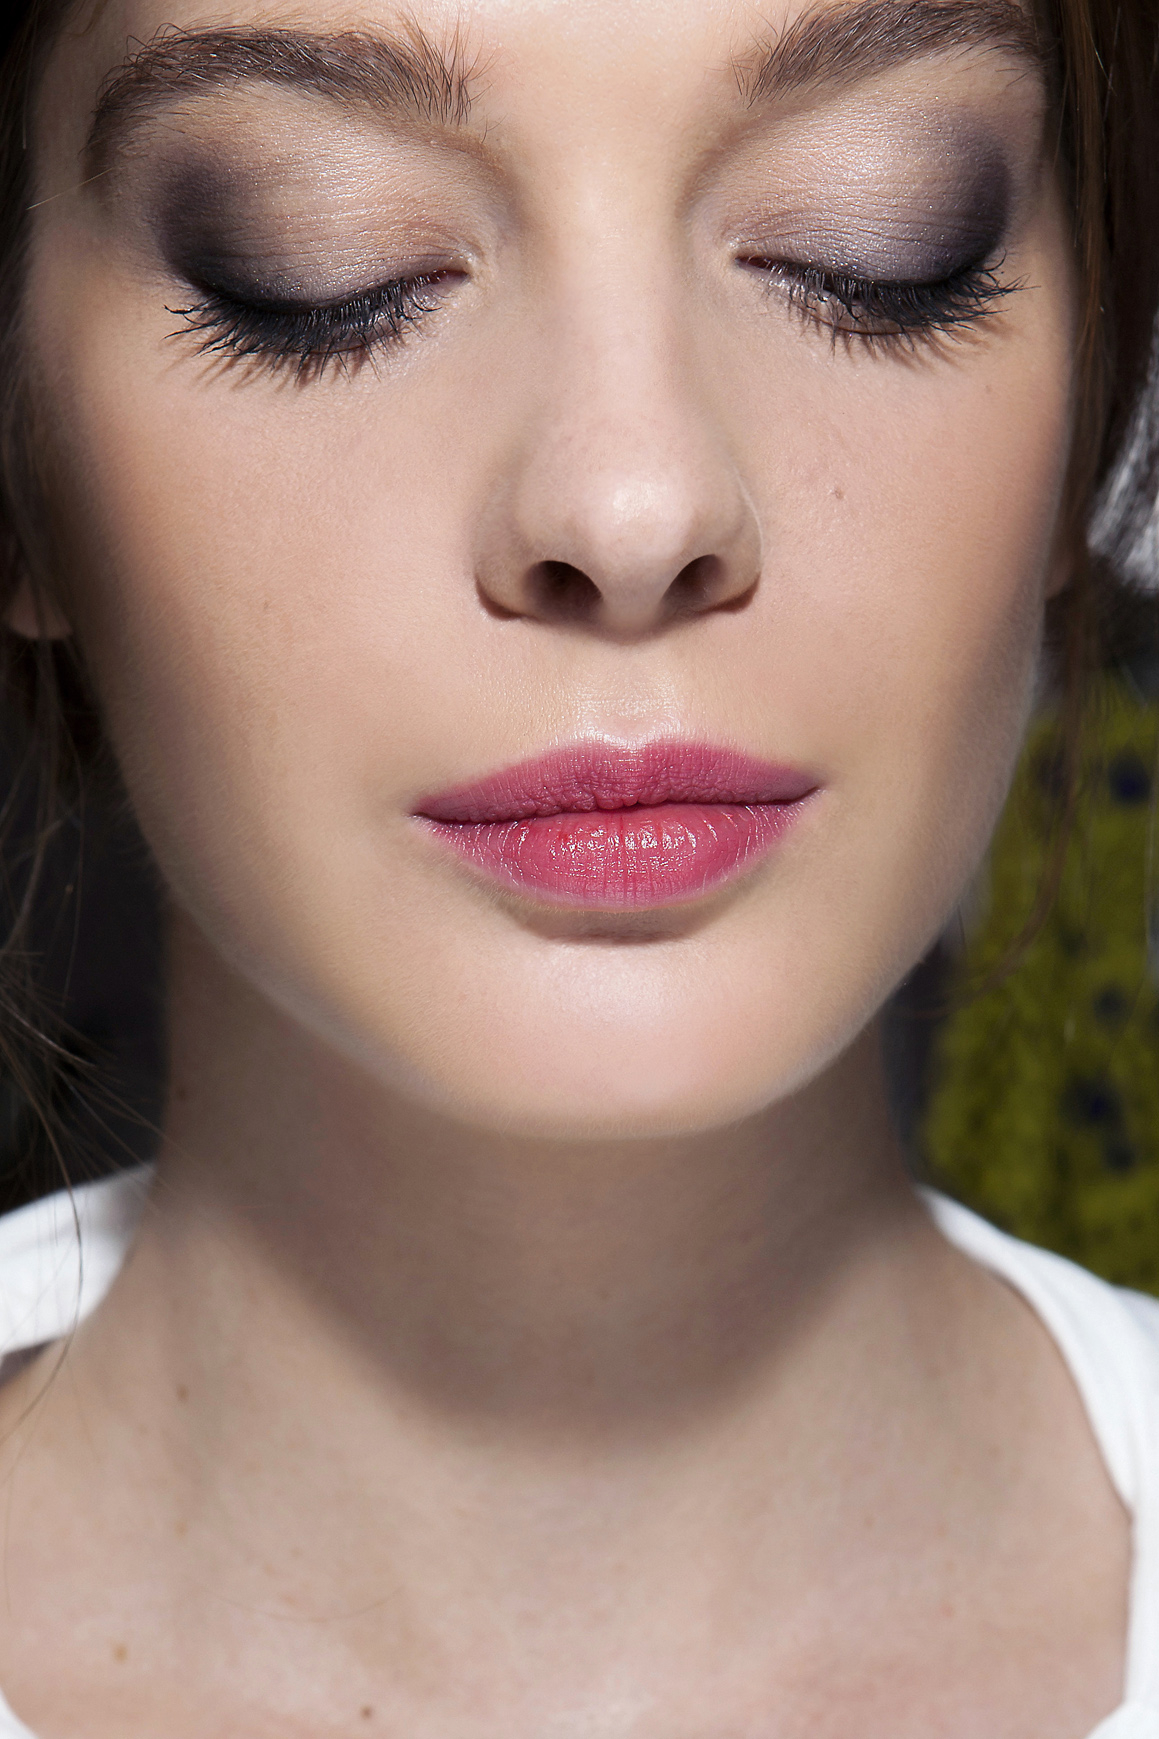 Eye Makeup For Hot Pink Lips Pink Lipstick What To Wear With The Bright Lip Color Stylecaster